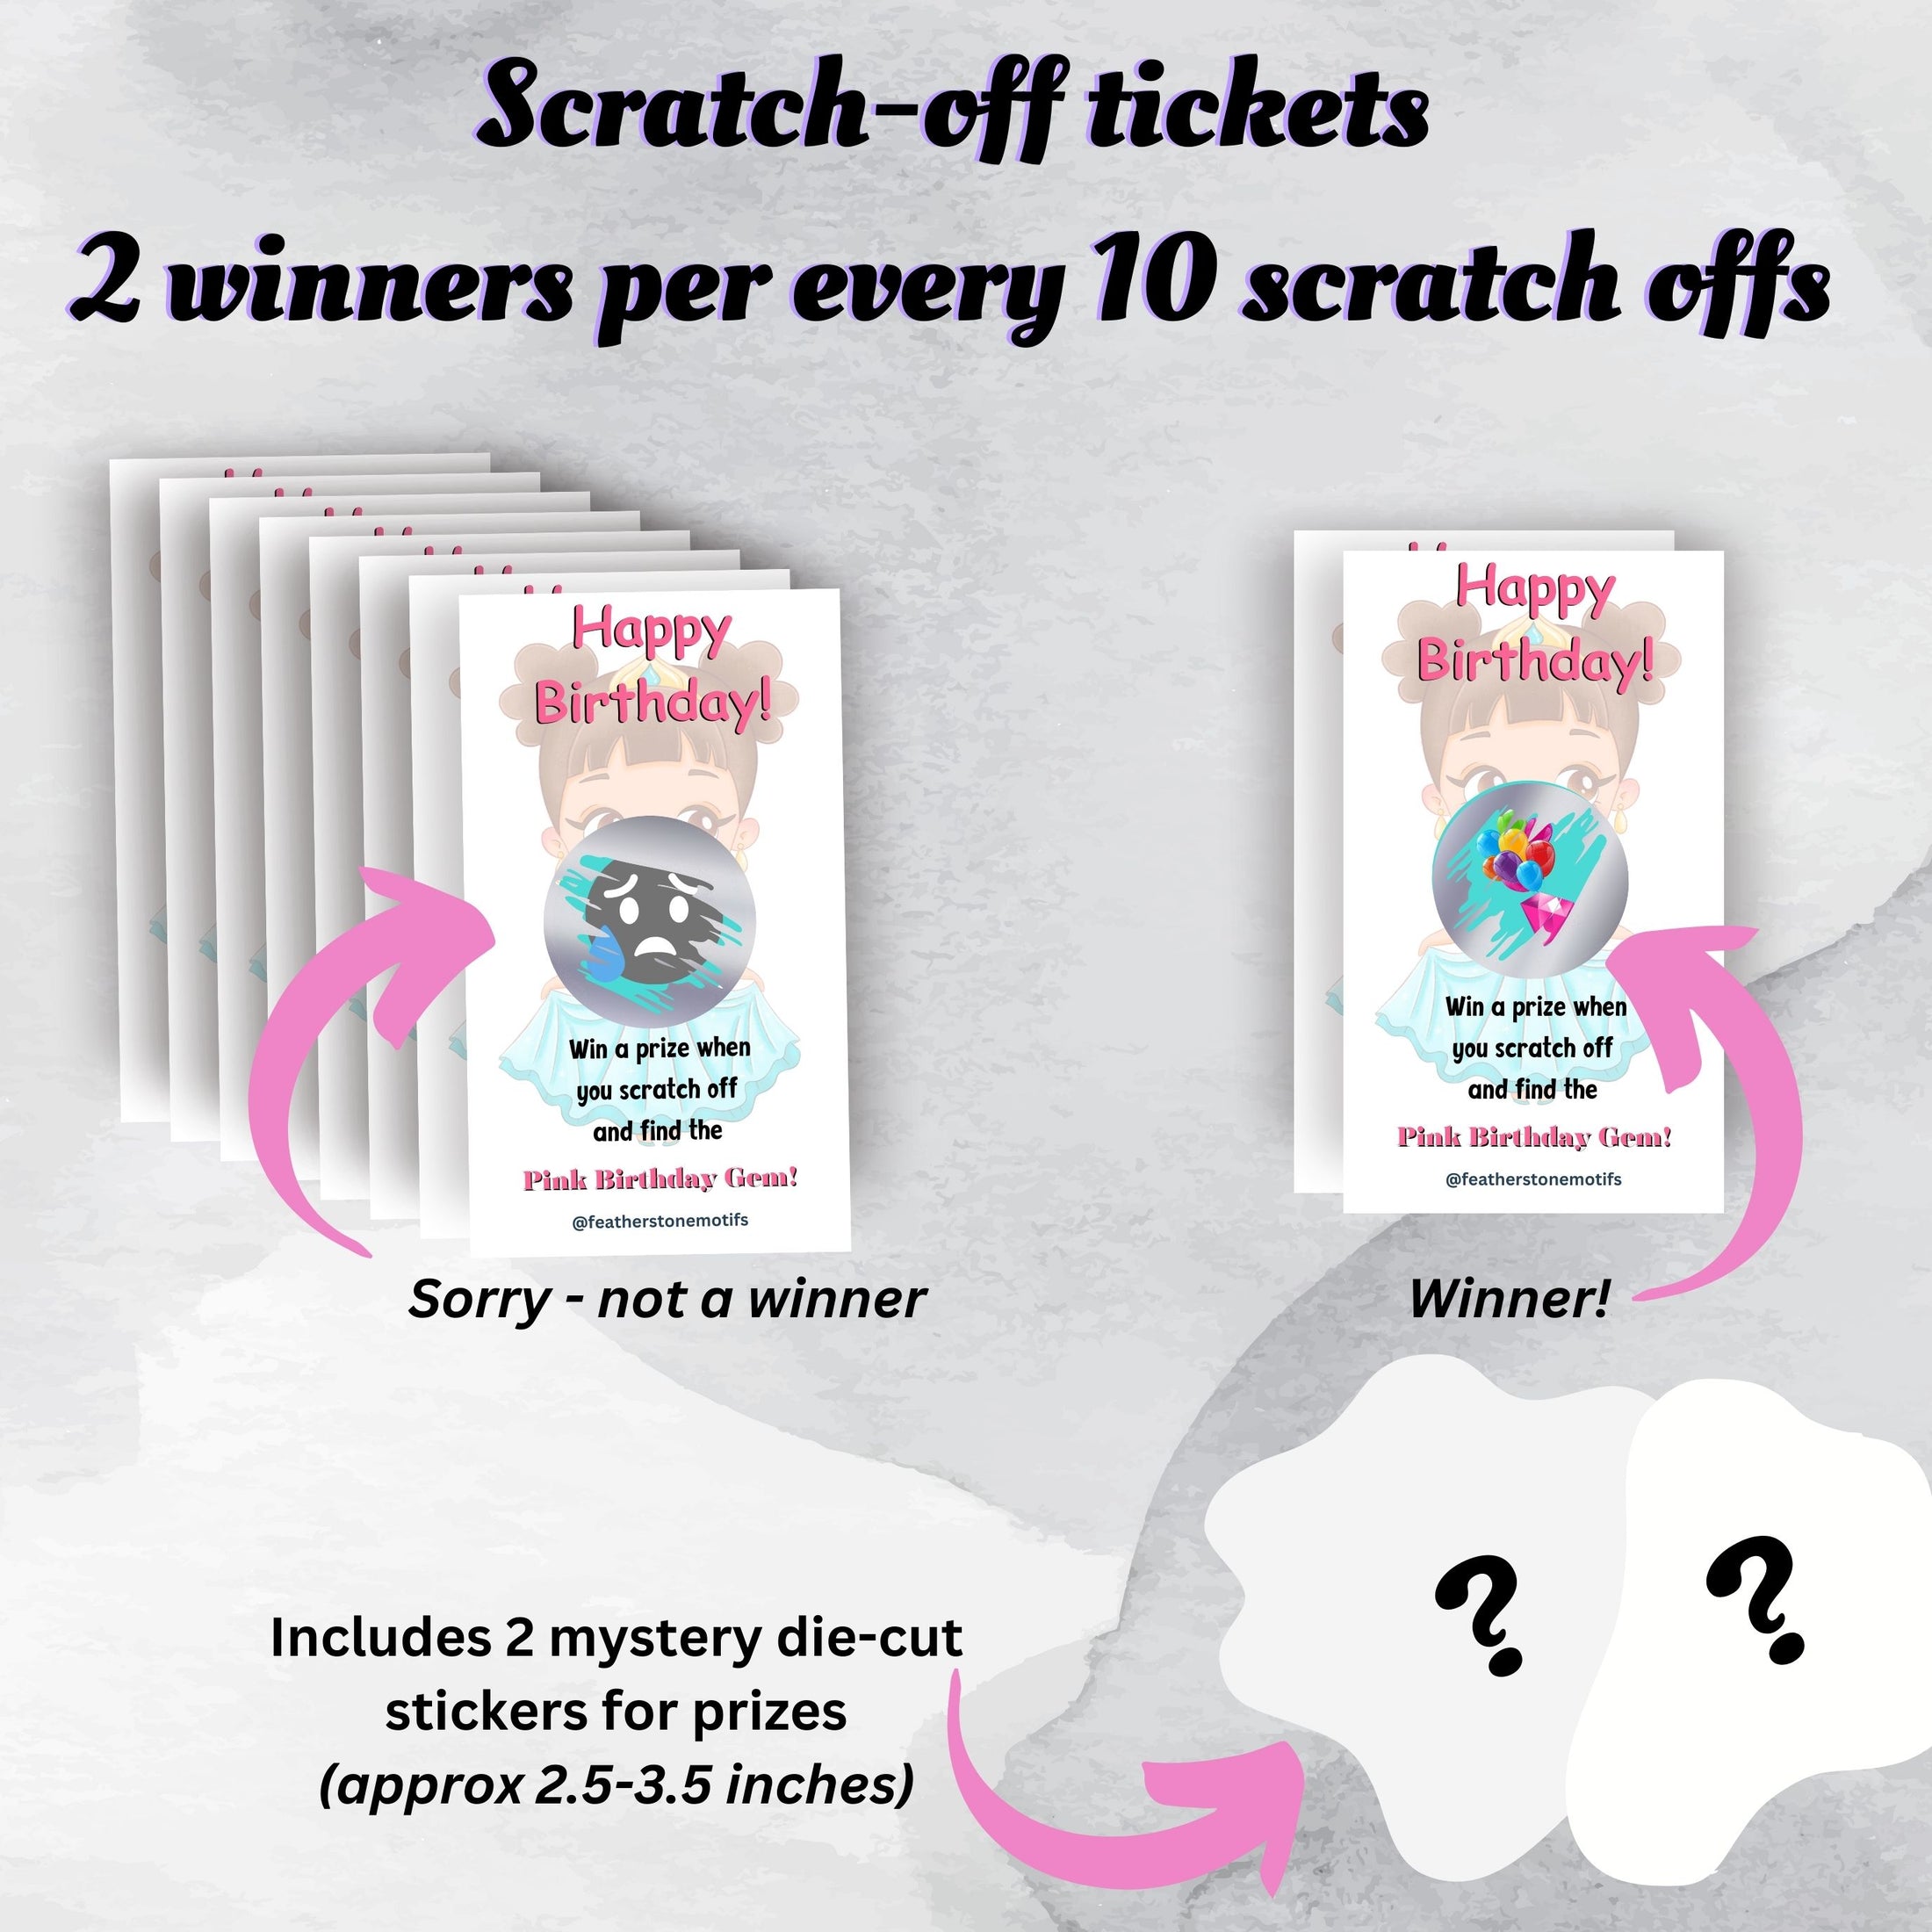 This image shows the scratch-off cards highlighting the winning and non-winning images. Each set of 10 scratch-off cards includes 2 mystery die-cut stickers as prizes.